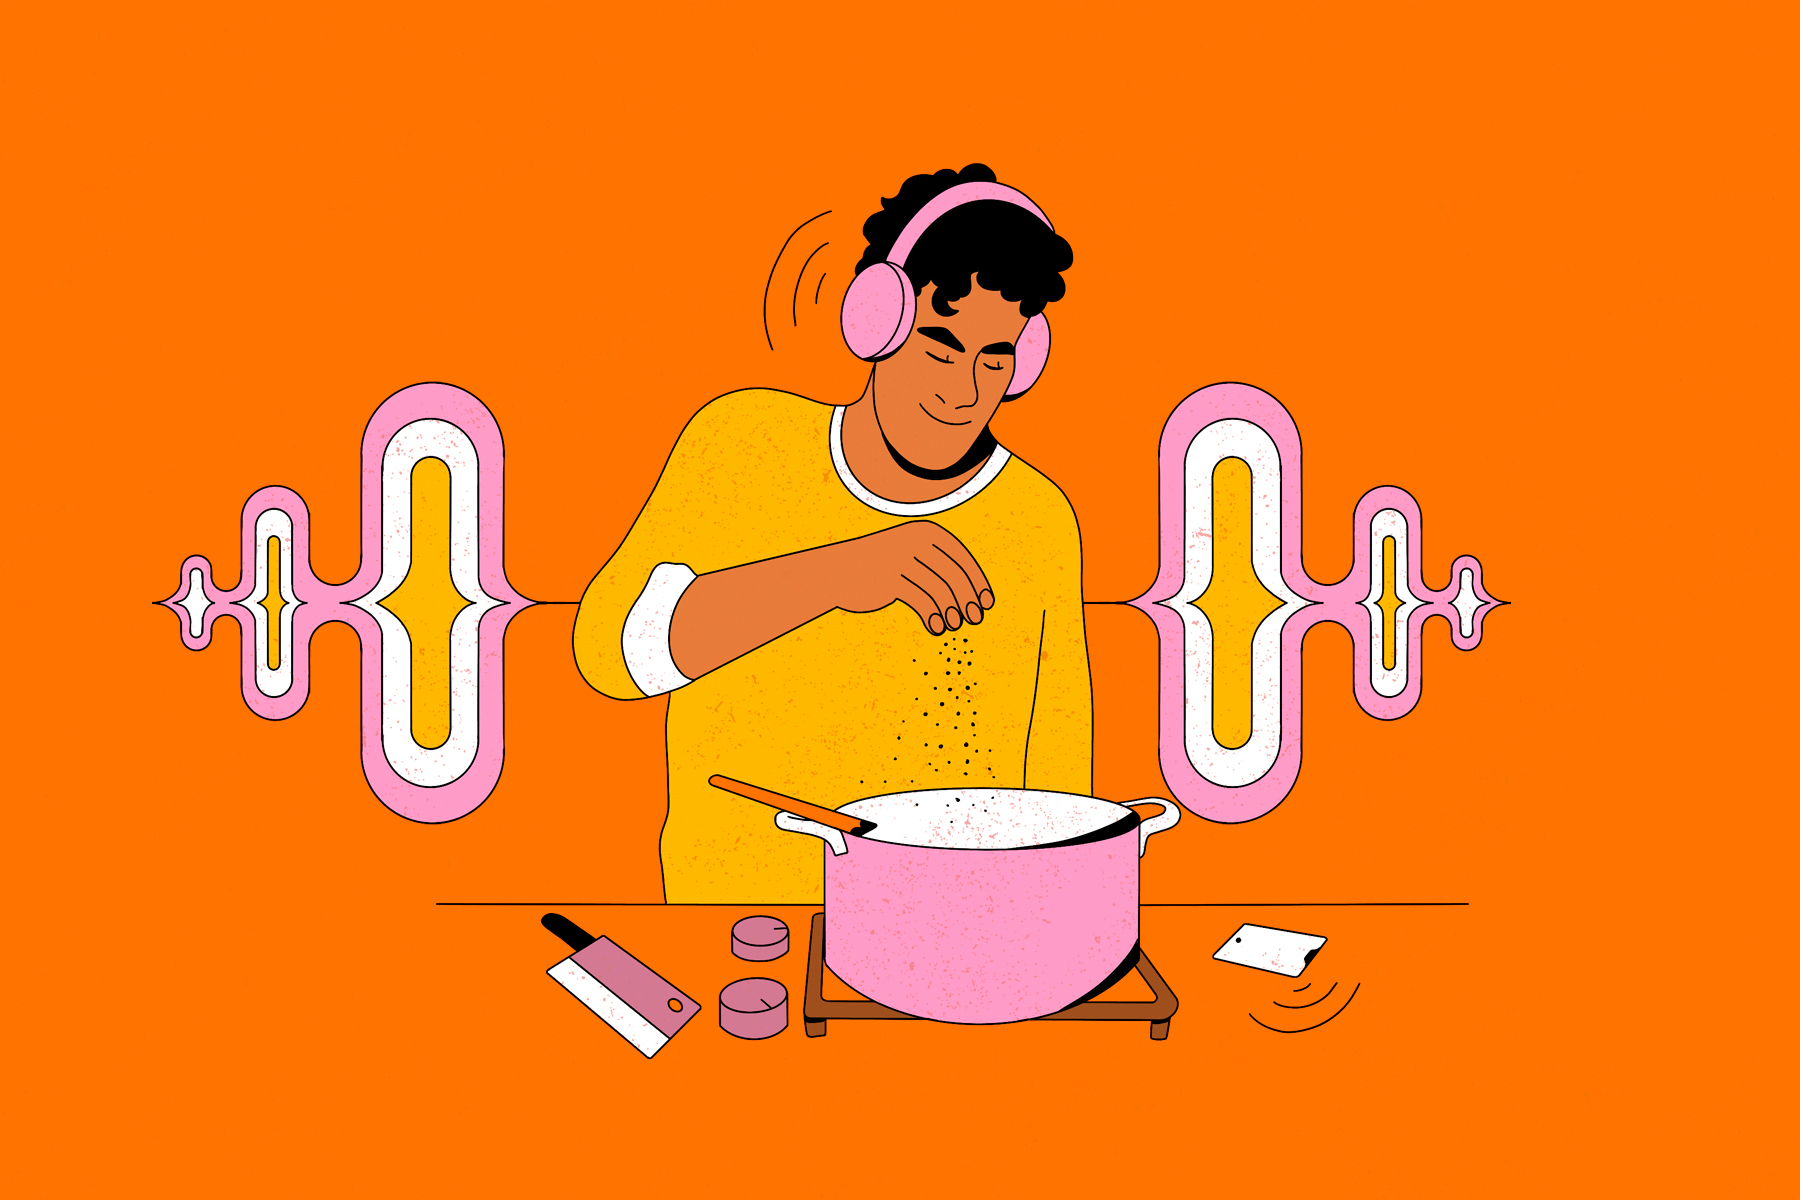 A colourful illustration of a man cooking while listening to an audiobook on headphones.